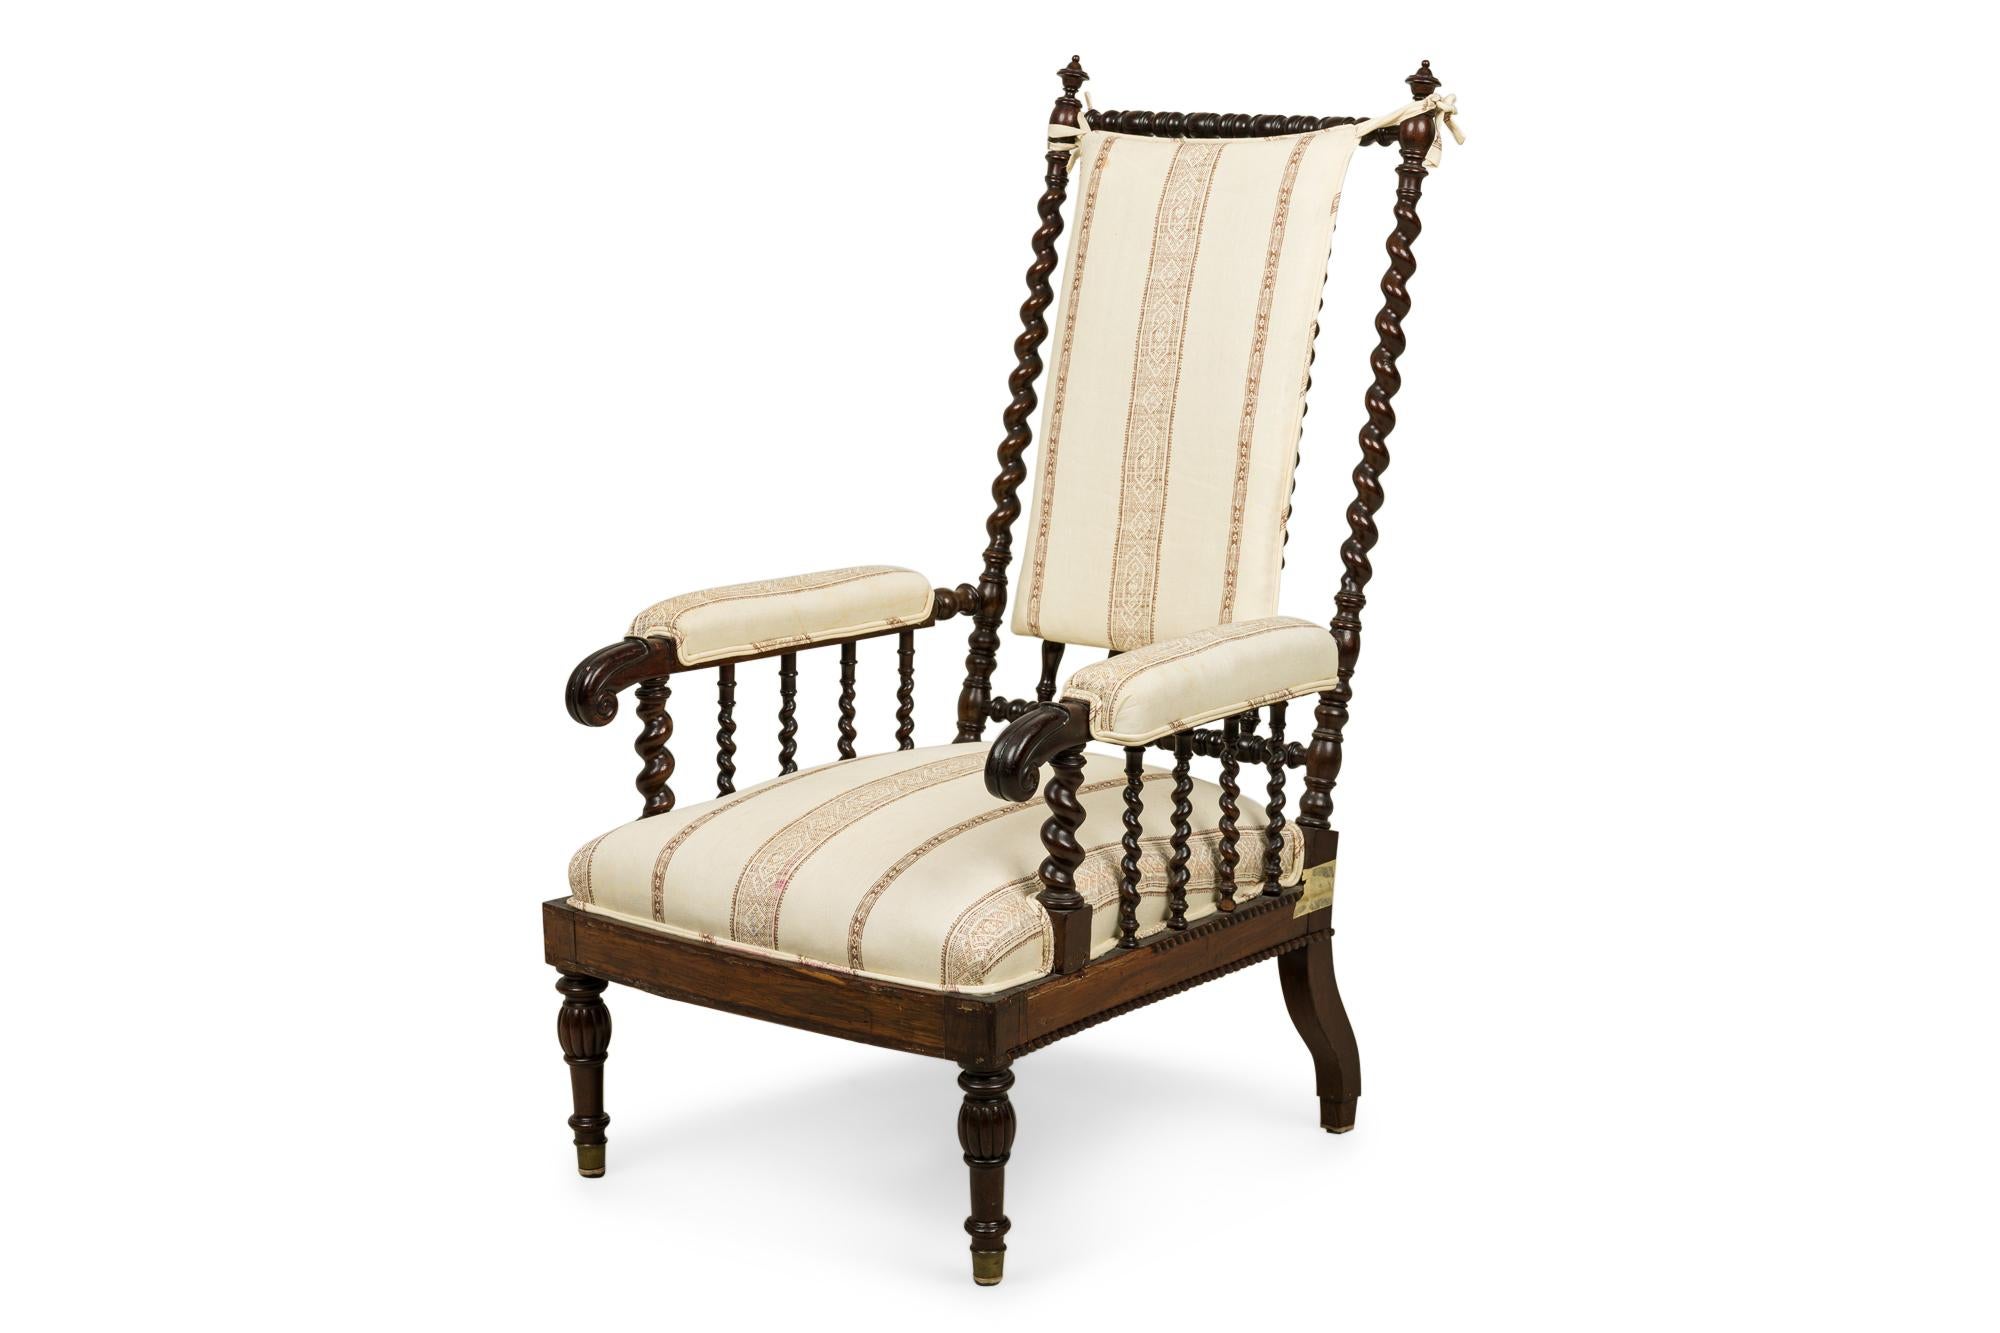 19th Century Victorian Mahogany Spiral Turned Spindle and Striped Upholstered Armchair For Sale